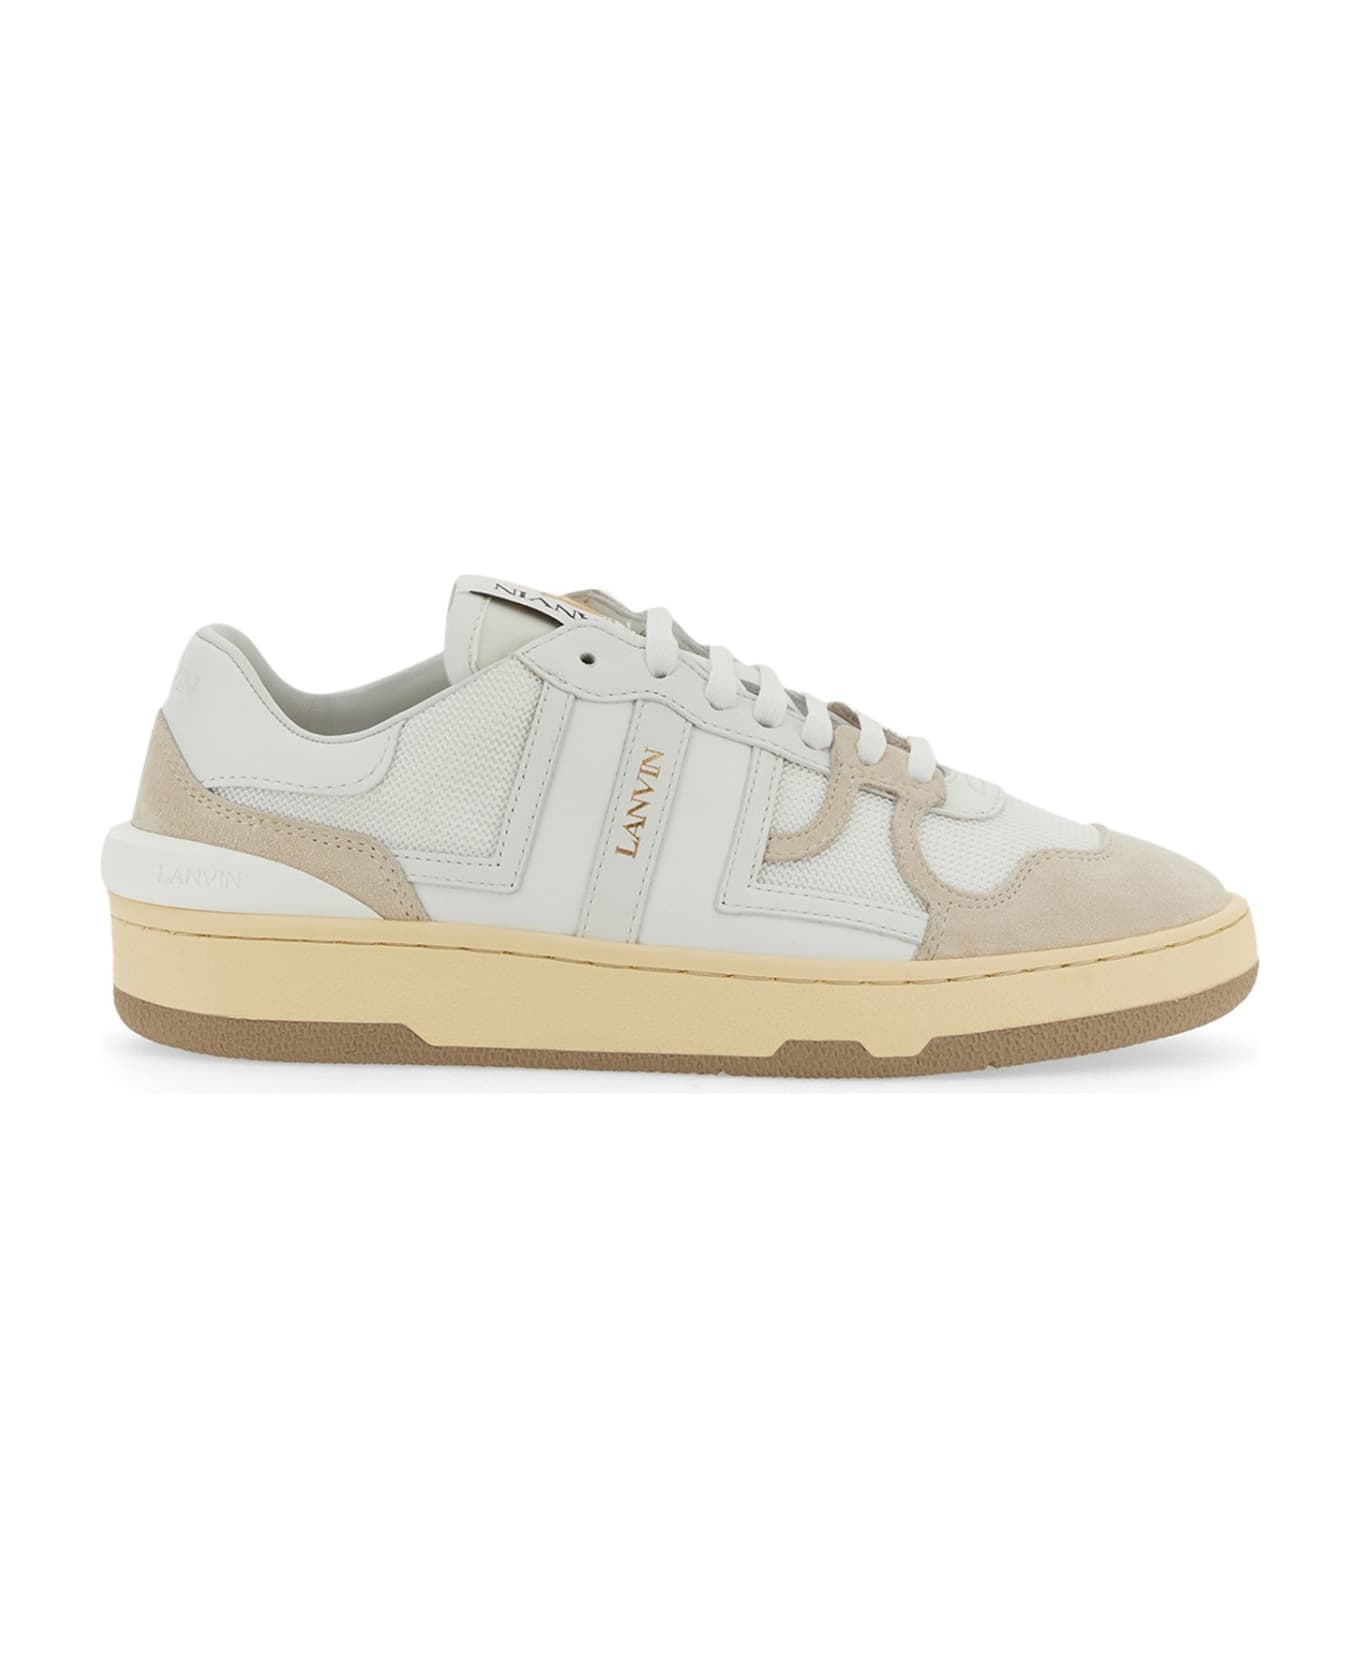 Lanvin Mesh, Suede And Nappa Leather Sneaker - Bianco